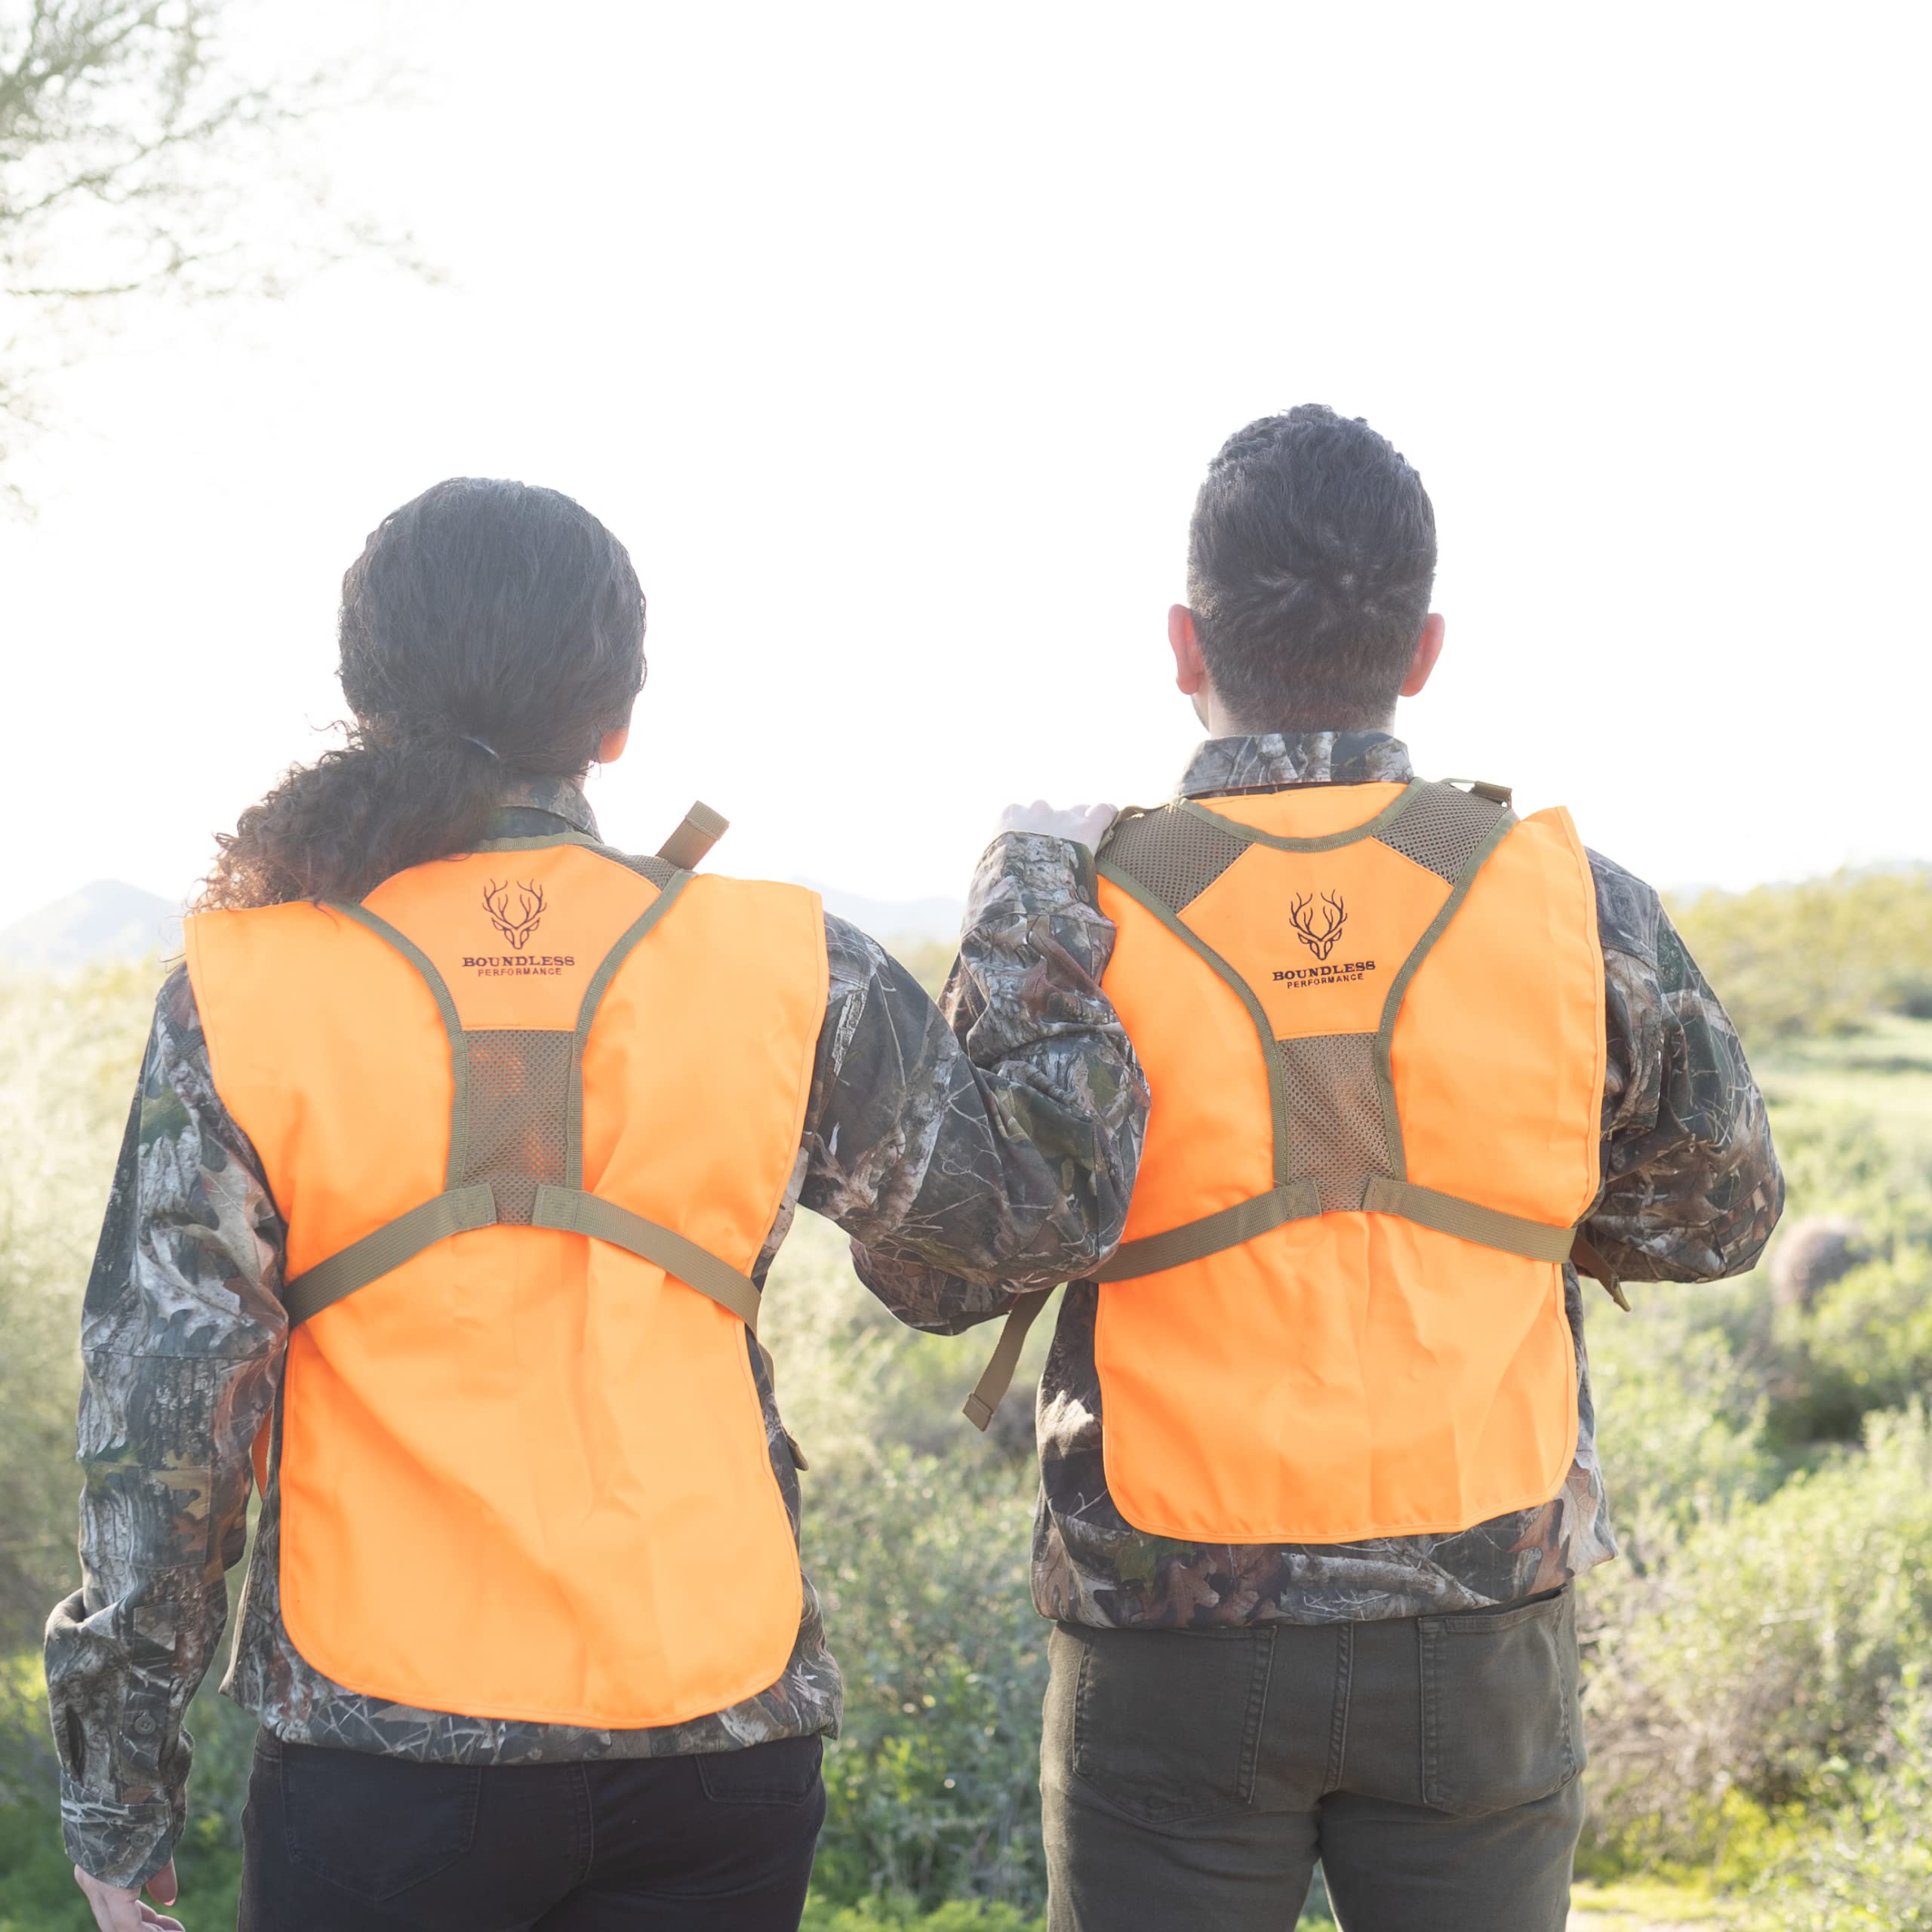 Boundless Performance Binocular Harness Chest Pack - Our Bino harness case is great for hunting, hiking, and shooting - Bino straps secure your binoculars - holds rangefinders, bullets, gear - Orange